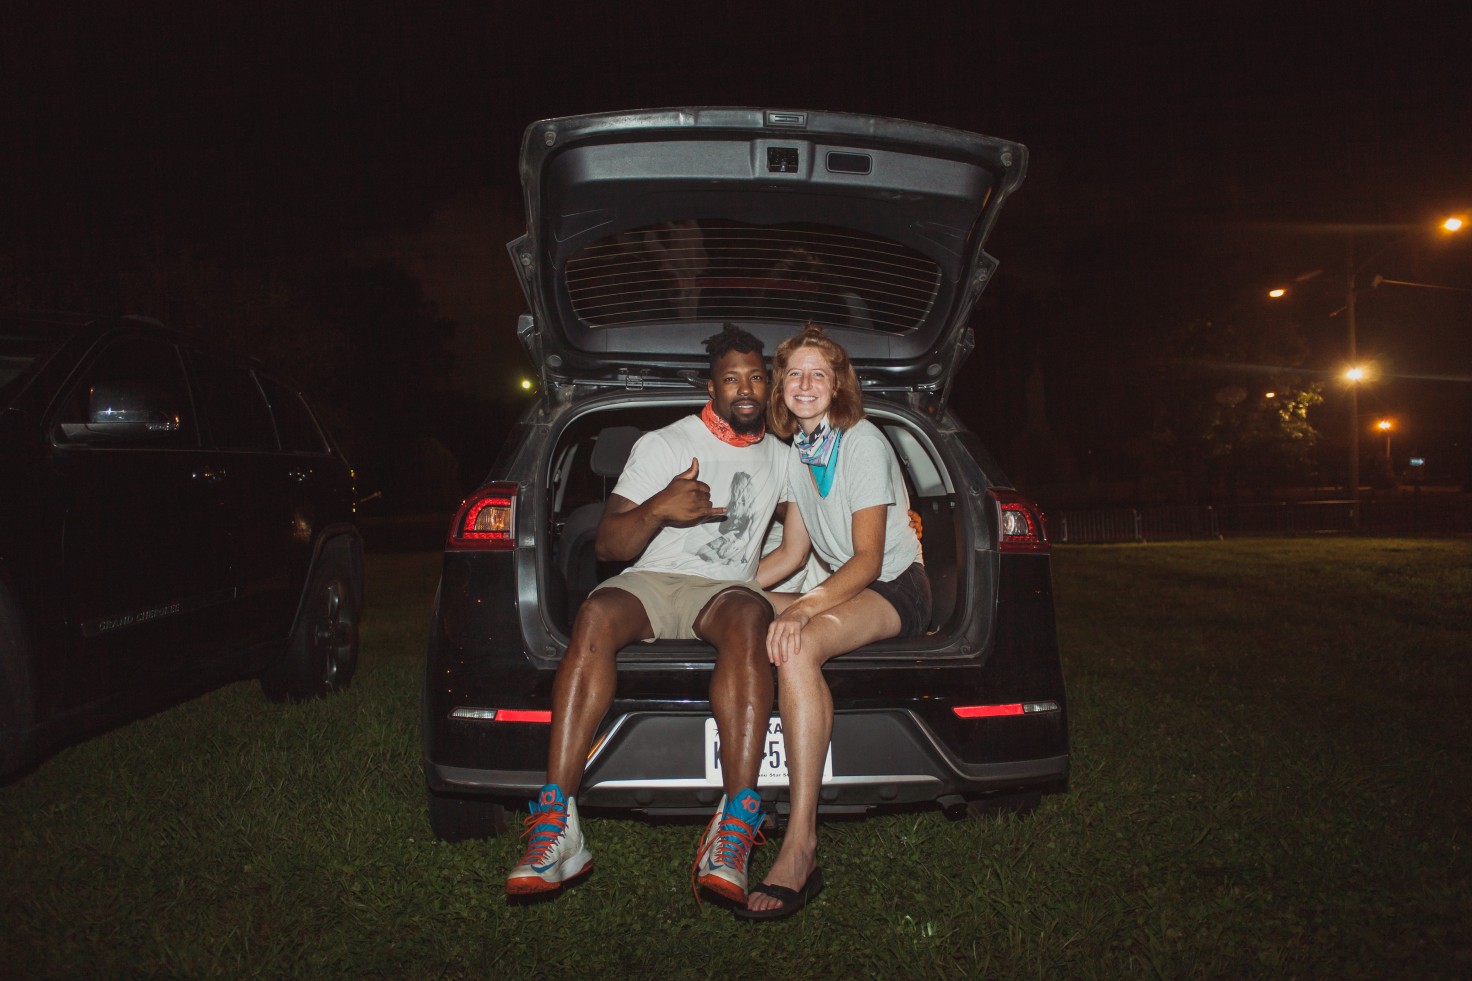 A photo of two people sitting in the truck of their car. They are smiling for the photo.